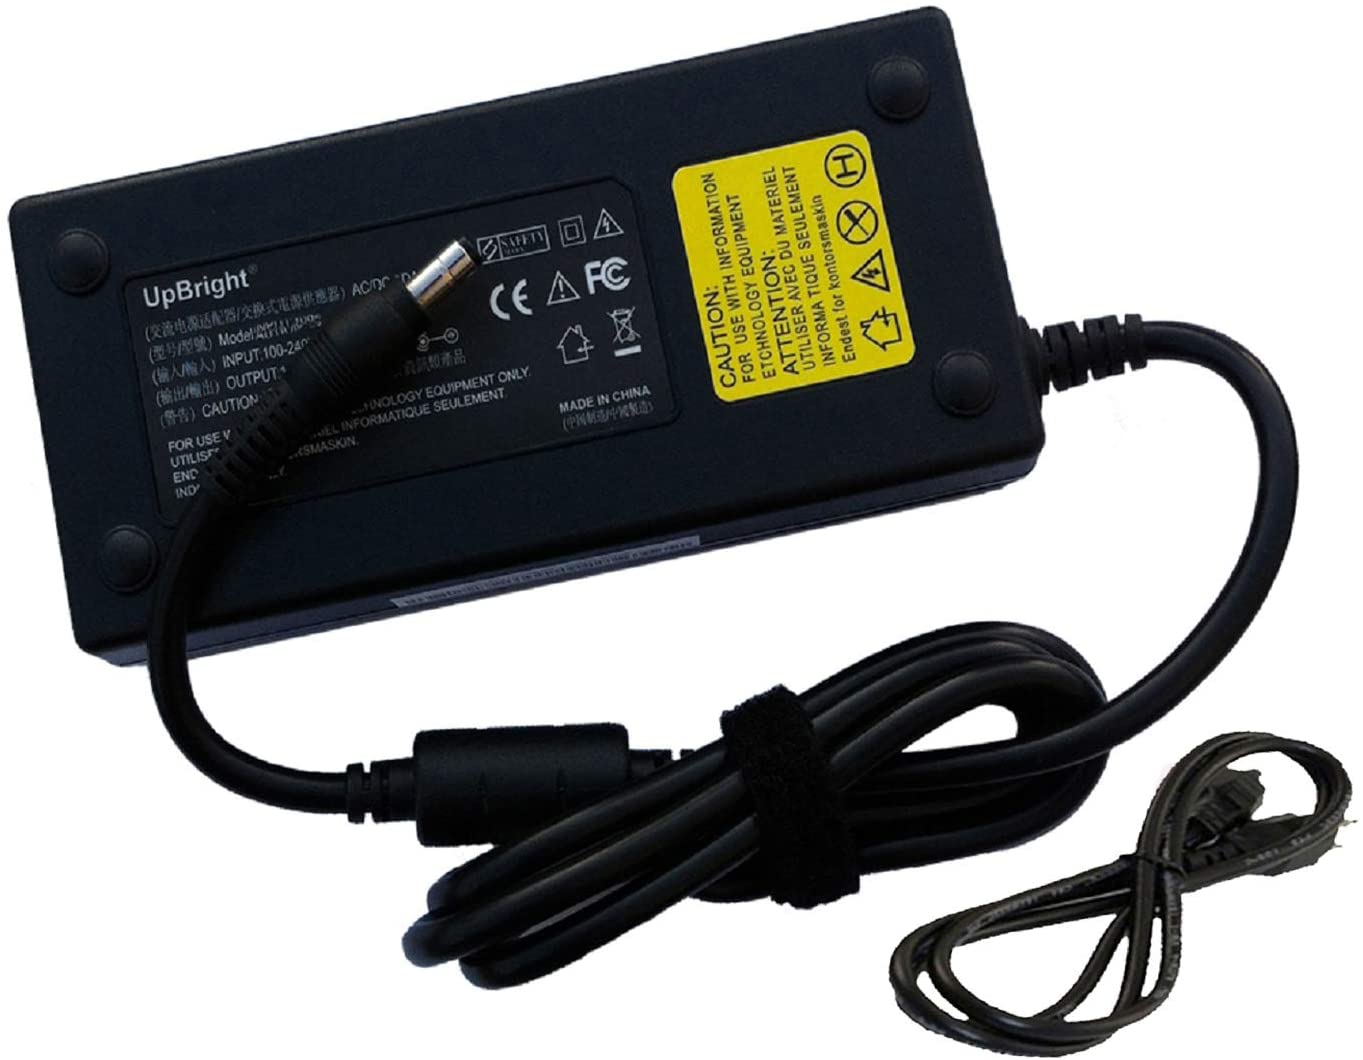 UPBRIGHT NEW AC / DC Adapter For Panasonic CF-532JCZYCM CF-532LCZACM CF-532ALP8CM CF-532ALZACM Toughbook i5-4310U Power Supply Cord Cable PS Charger PSU - image 1 of 5